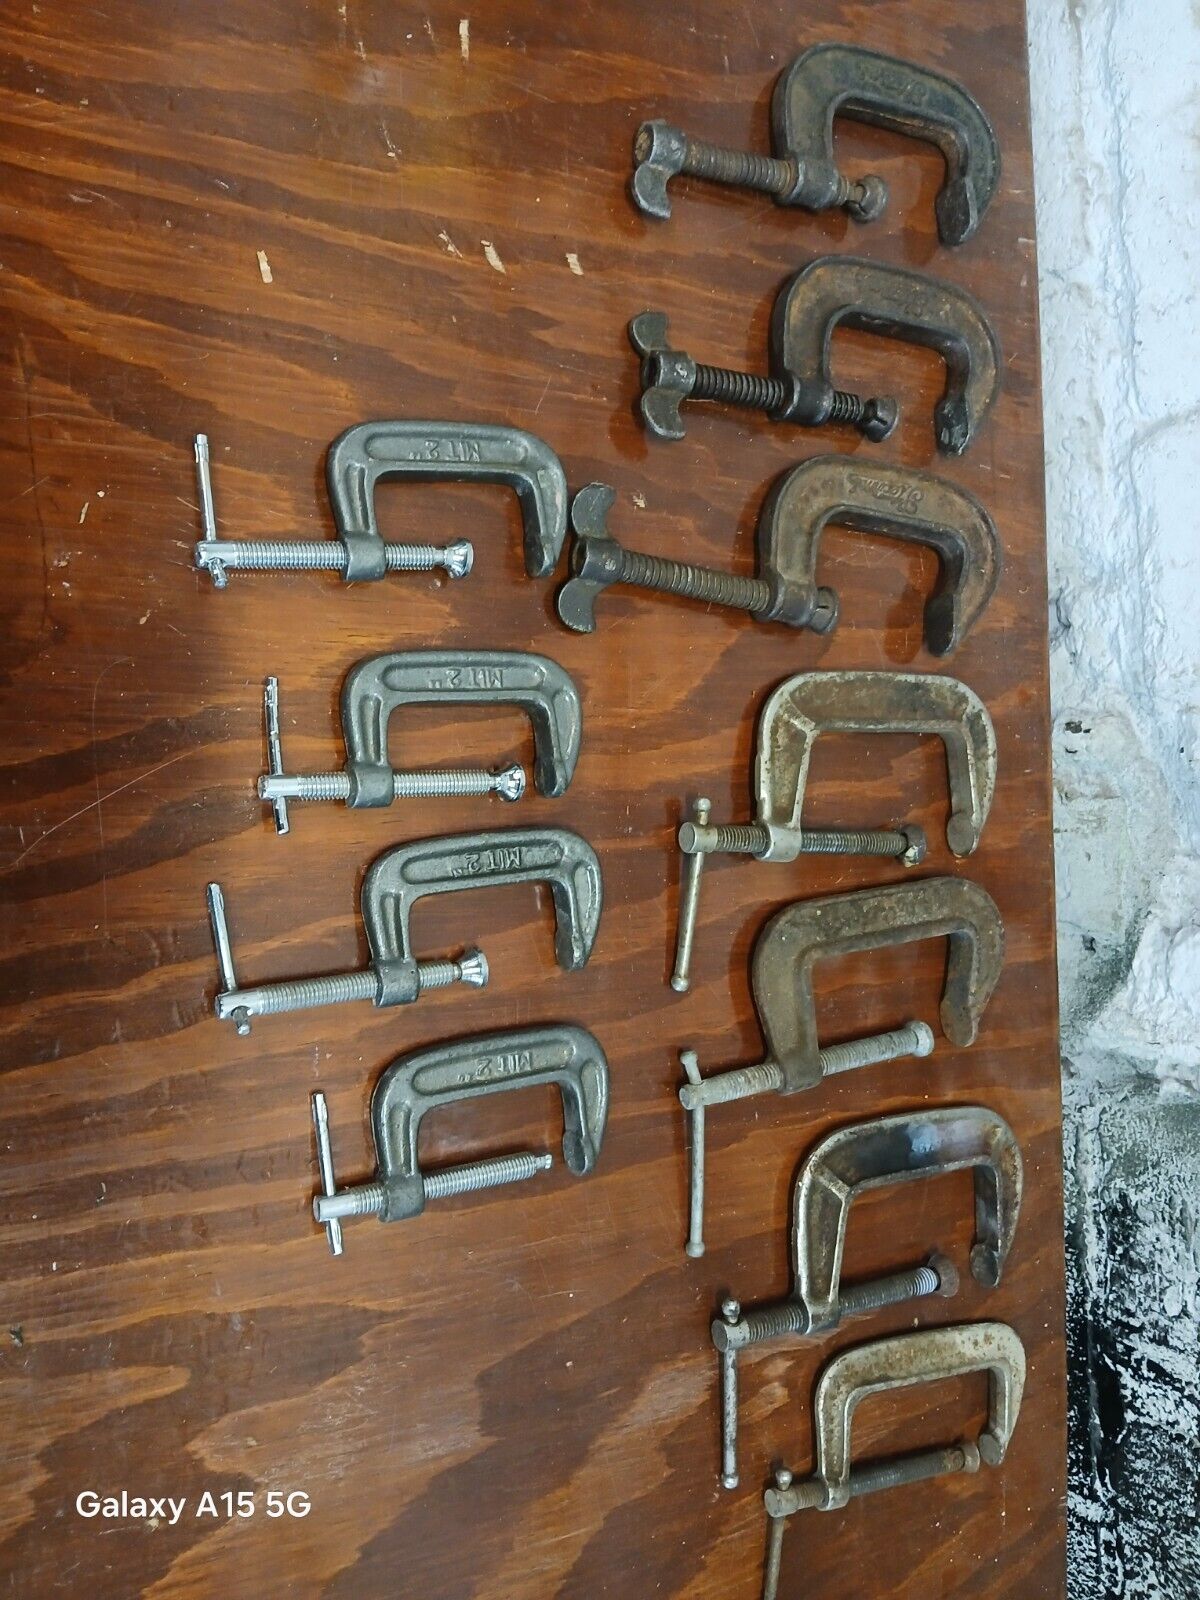 11 C-Clamps Lot Vintage Clamping Tools Welder Mechanic Machinist Woodworking 